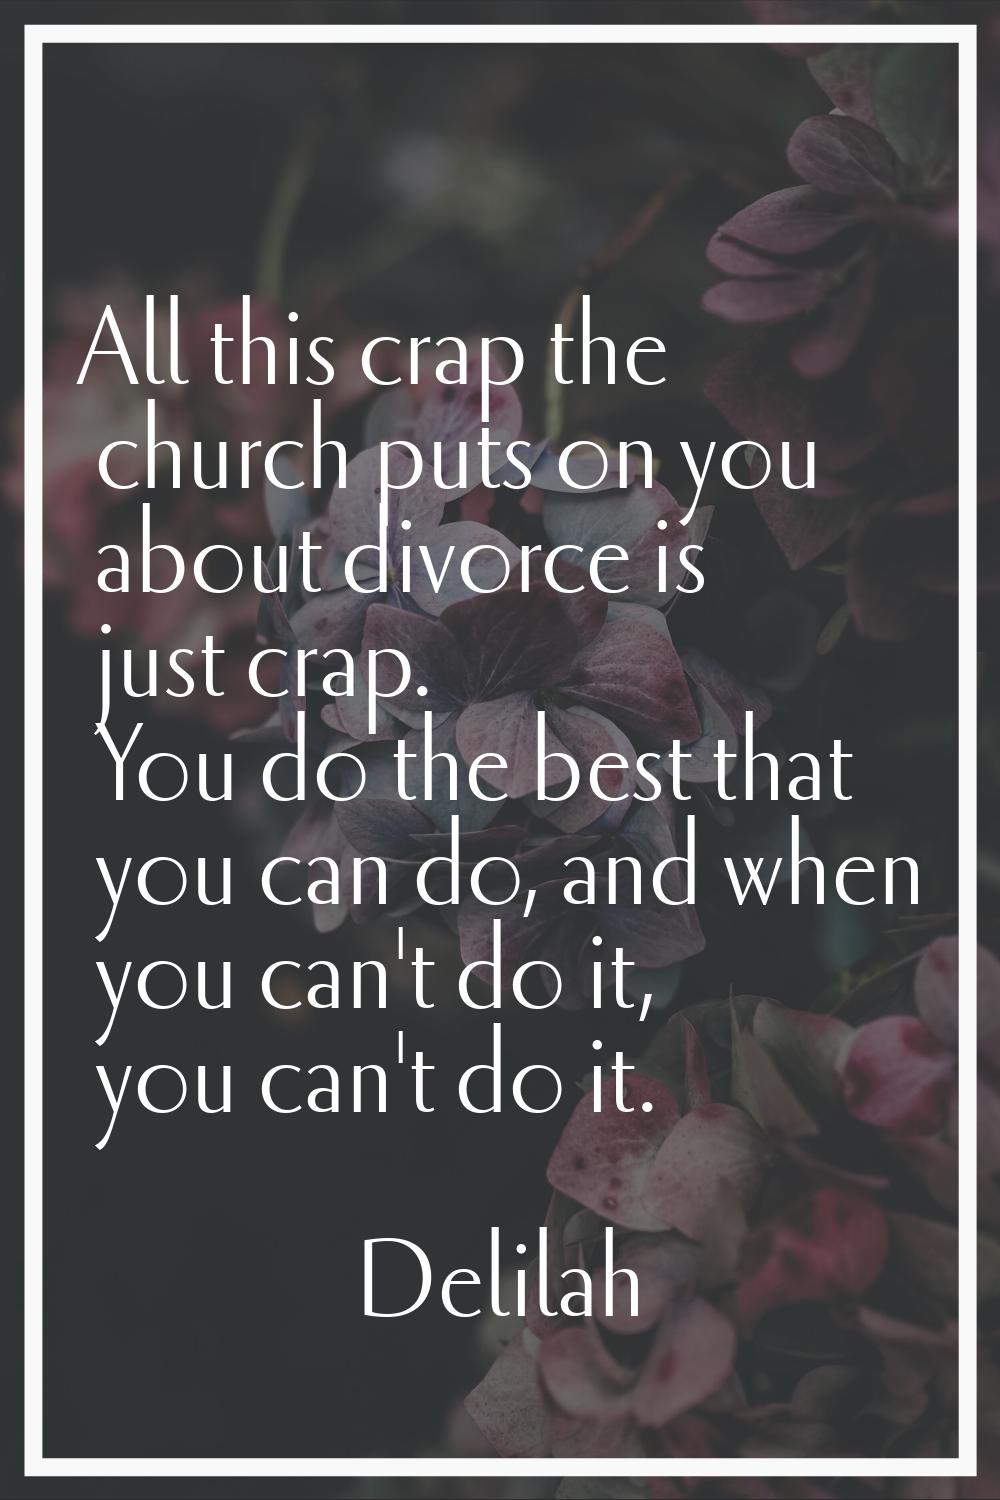 All this crap the church puts on you about divorce is just crap. You do the best that you can do, a